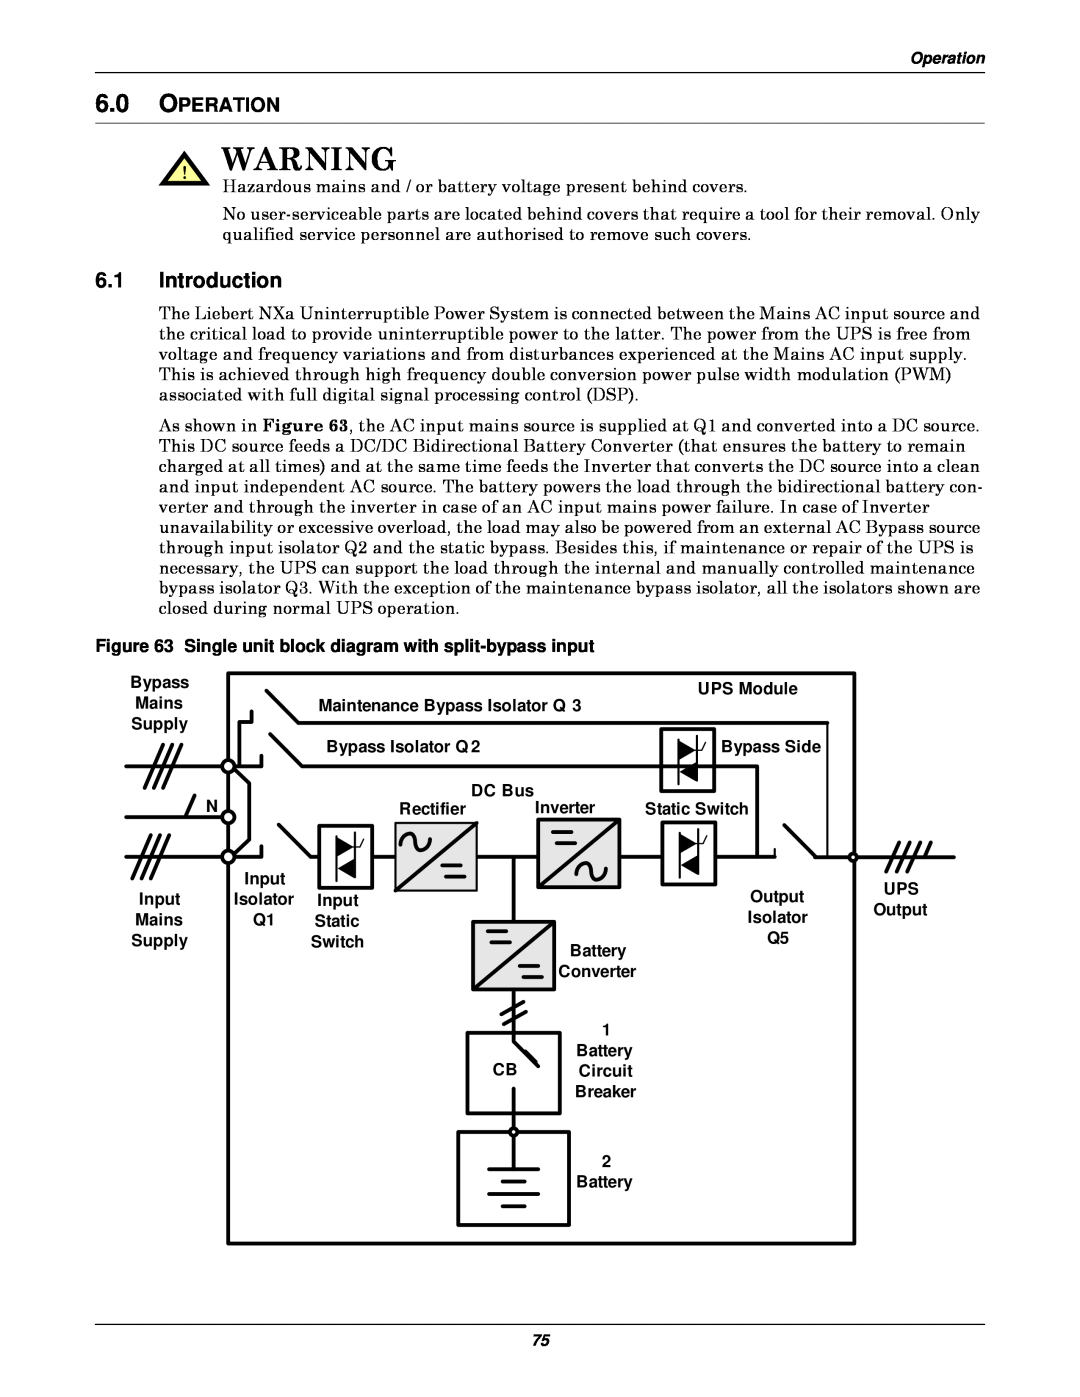 Emerson 50 and 60 Hz Introduction, Operation, Single unit block diagram with split-bypass input, Bypass Mains Supply N 